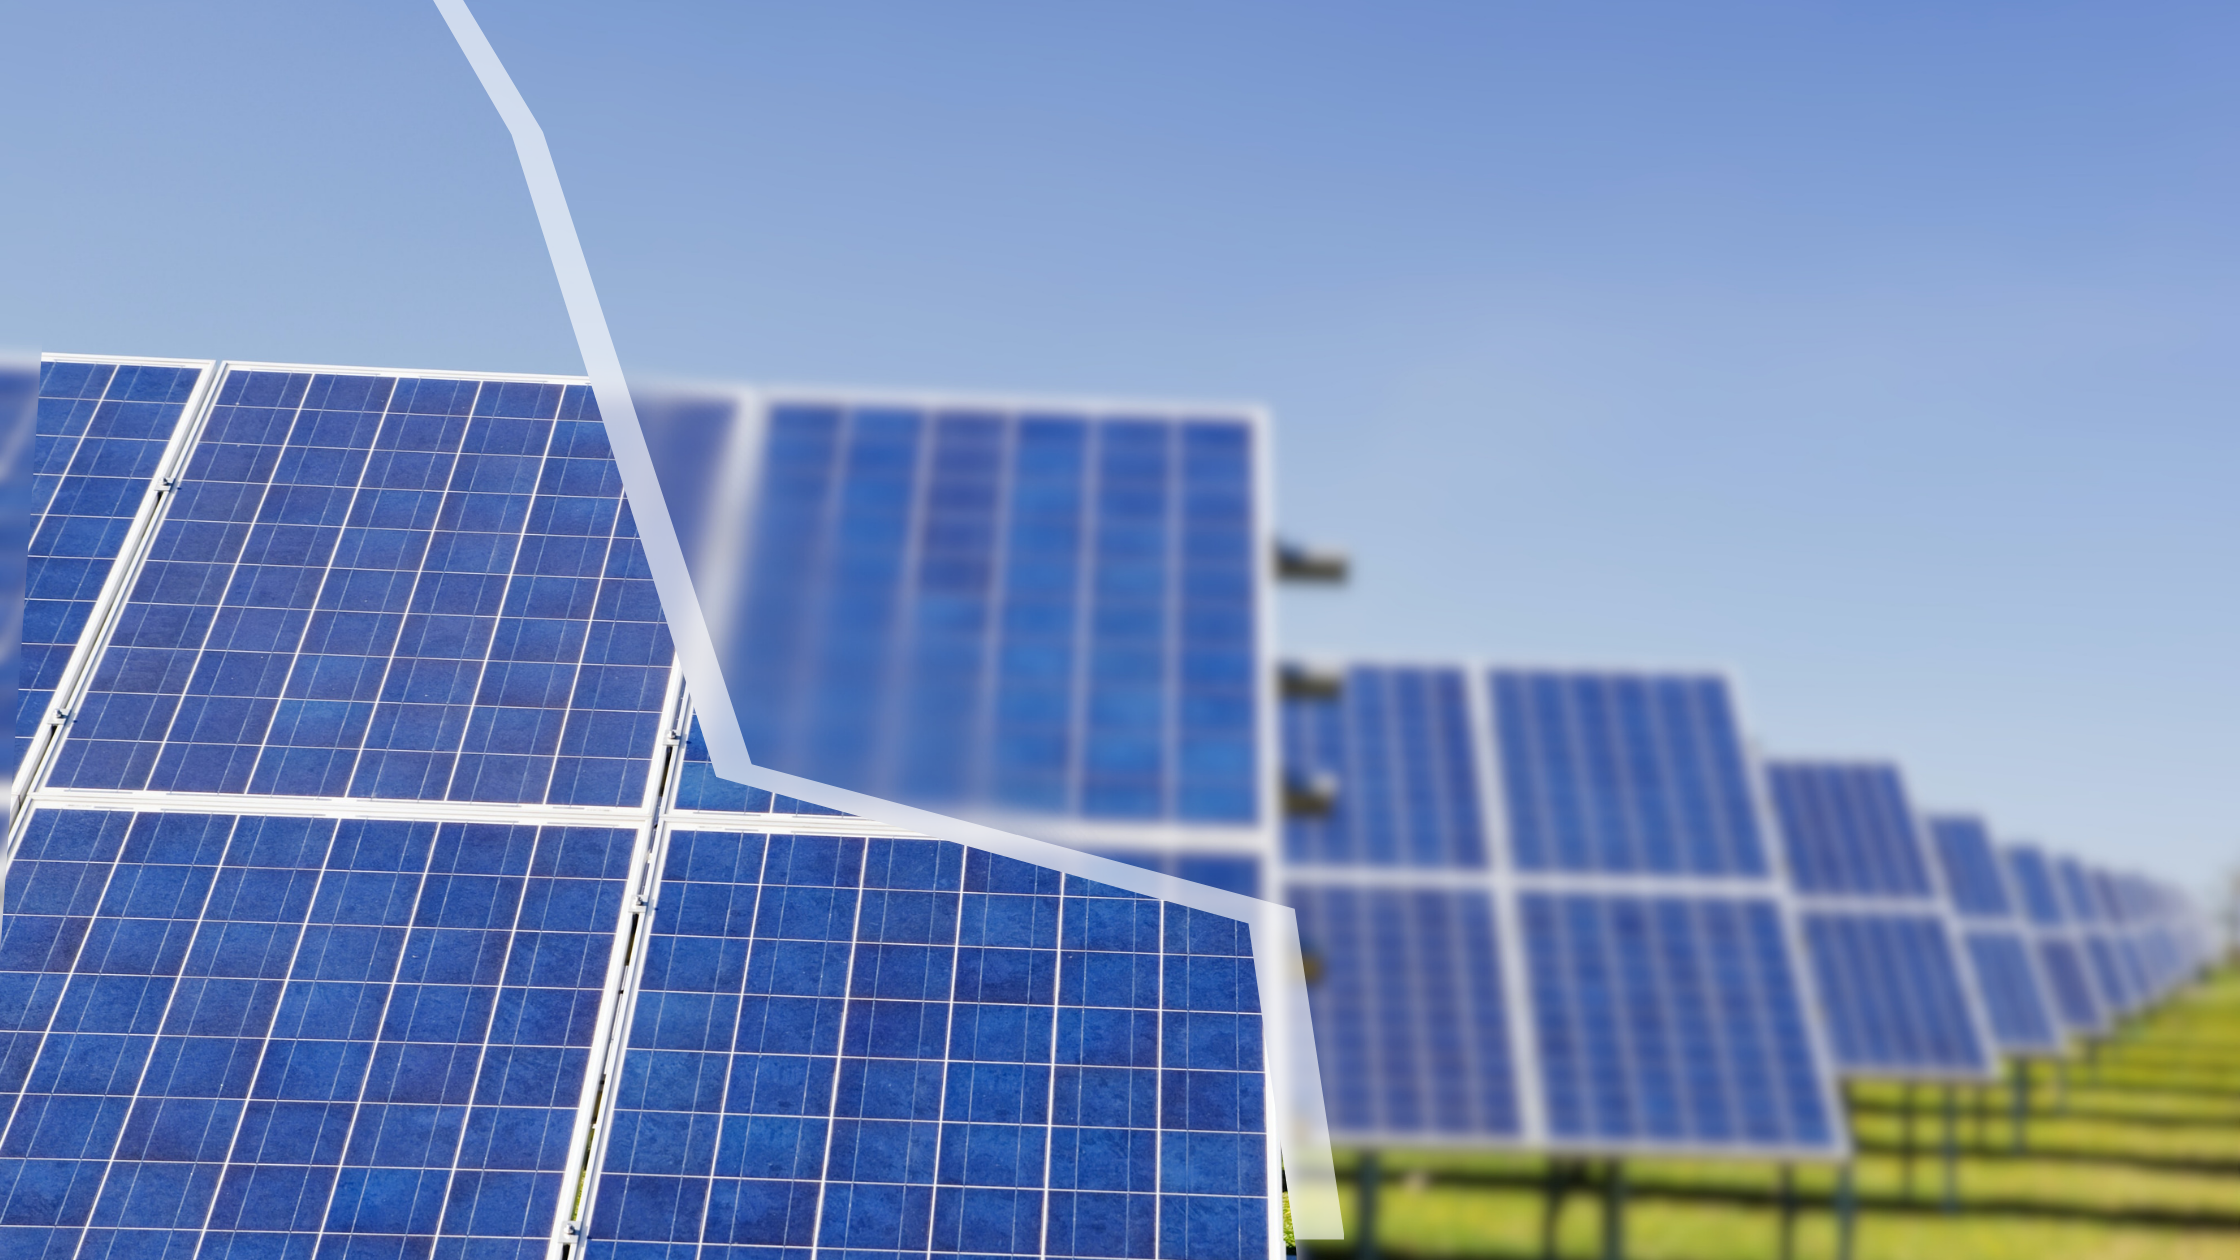 Leveraging data to identify solar risks and losses